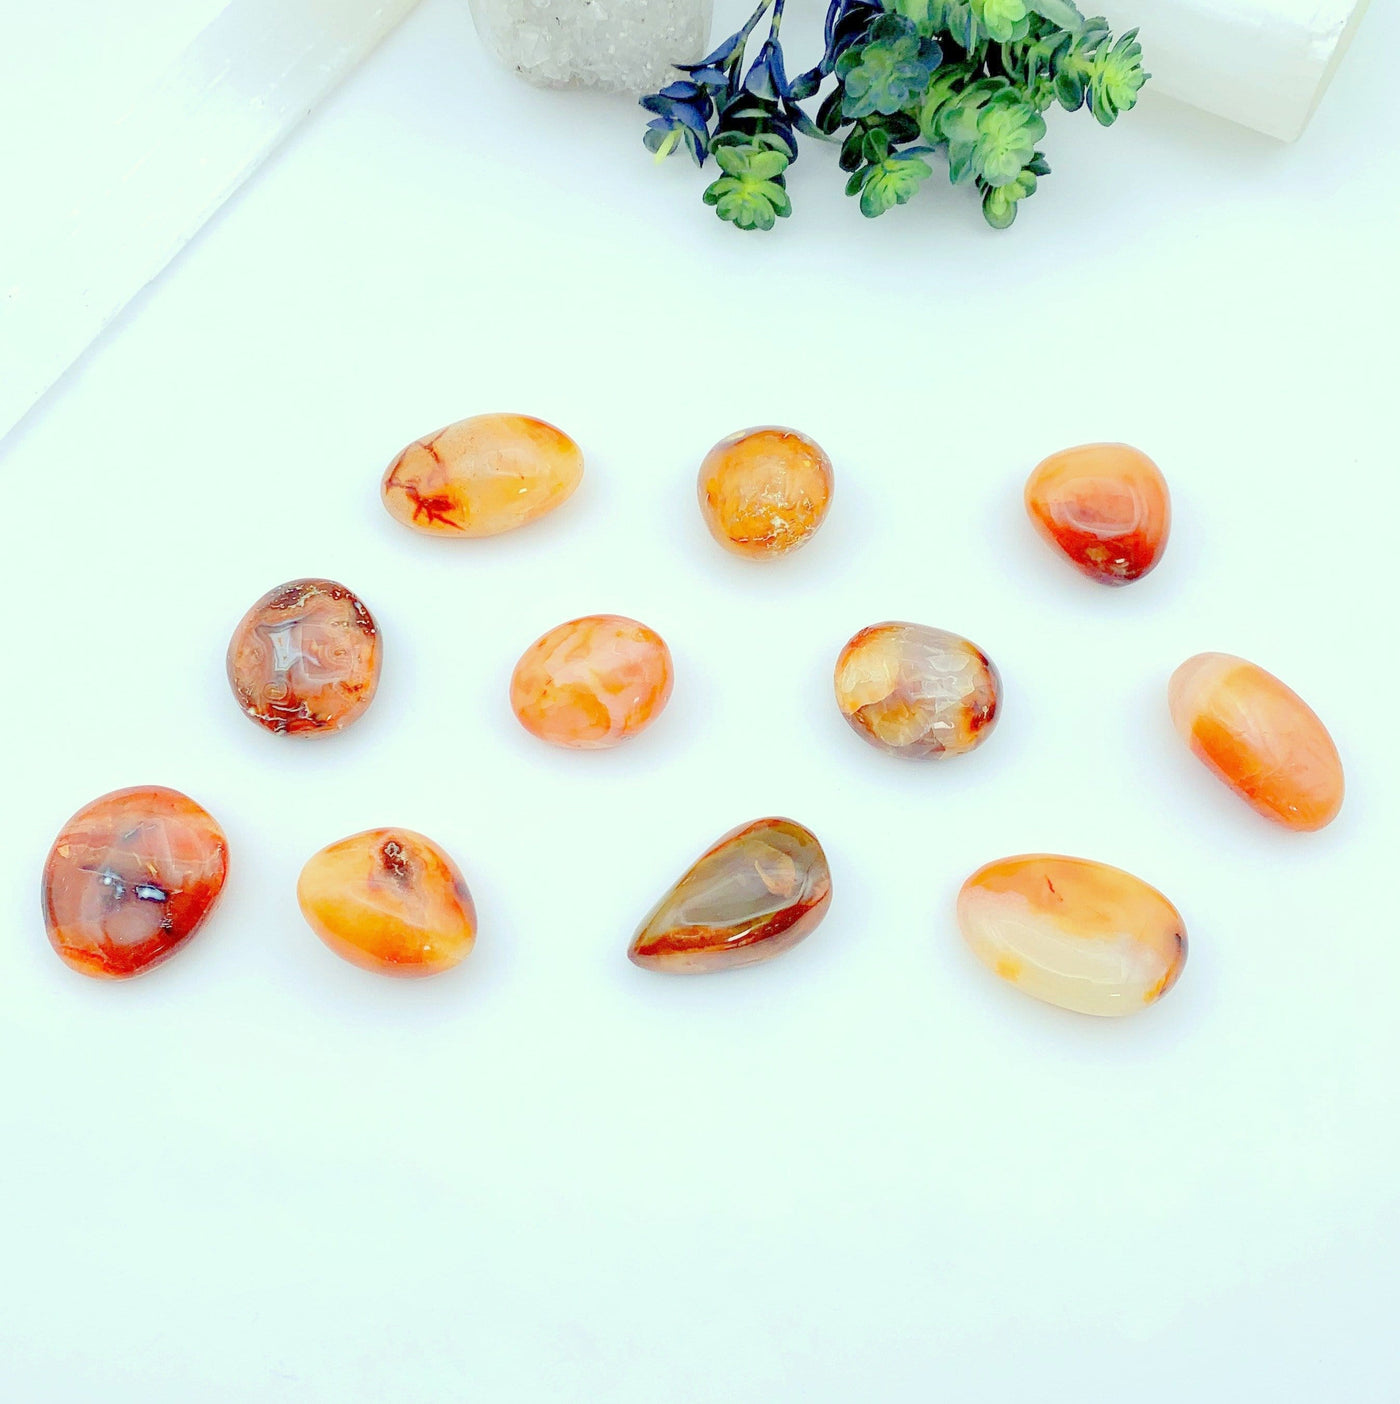 11 carnelian stones on a  white background